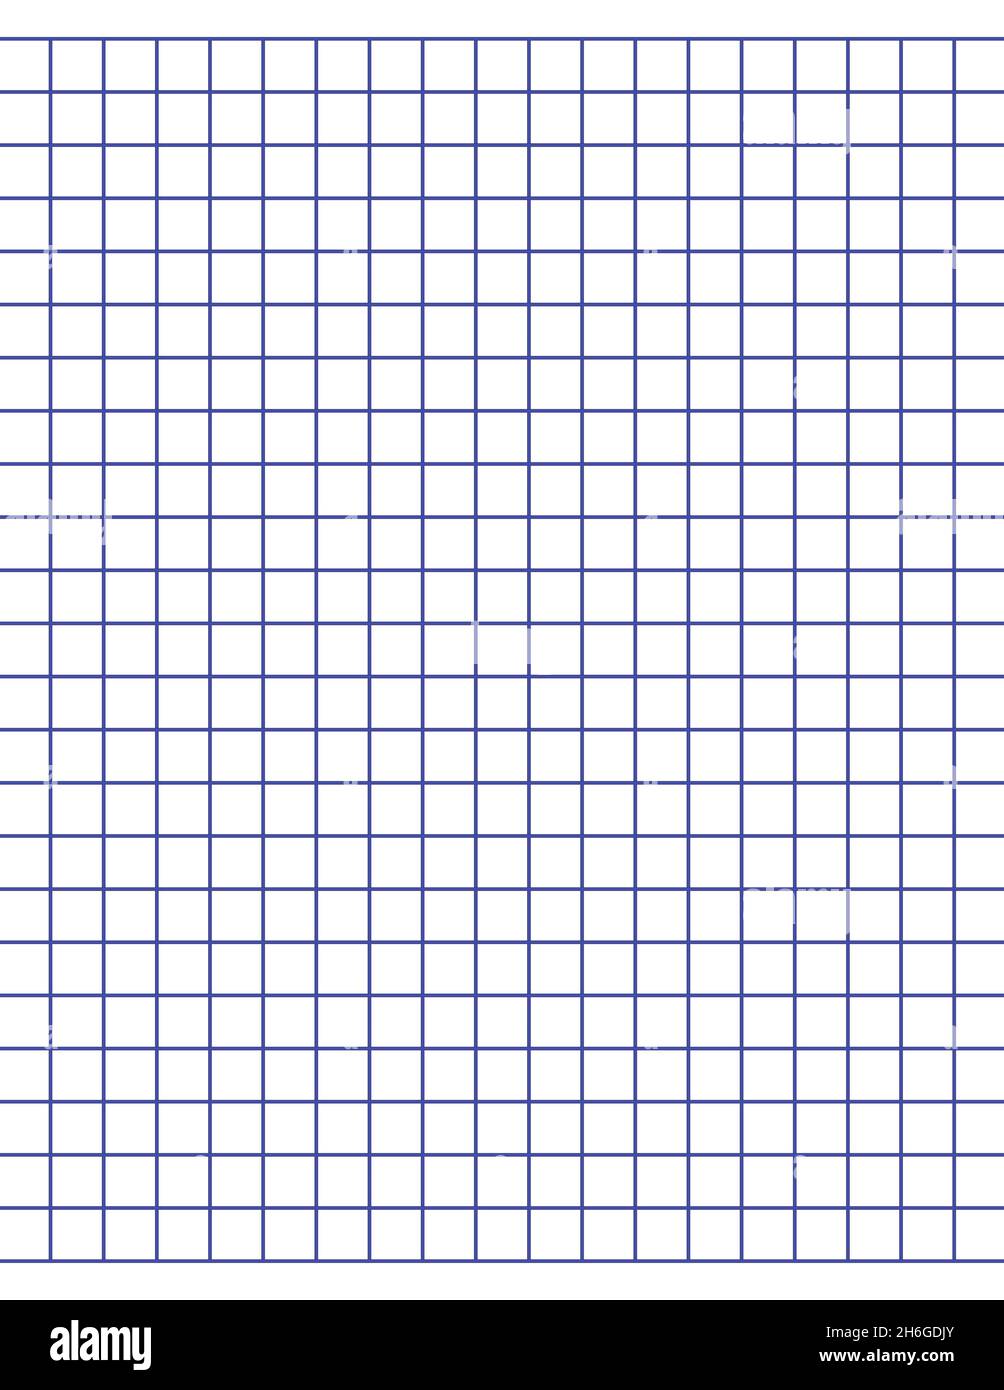 graph-paper-printable-squared-grid-paper-with-color-horizontal-lines